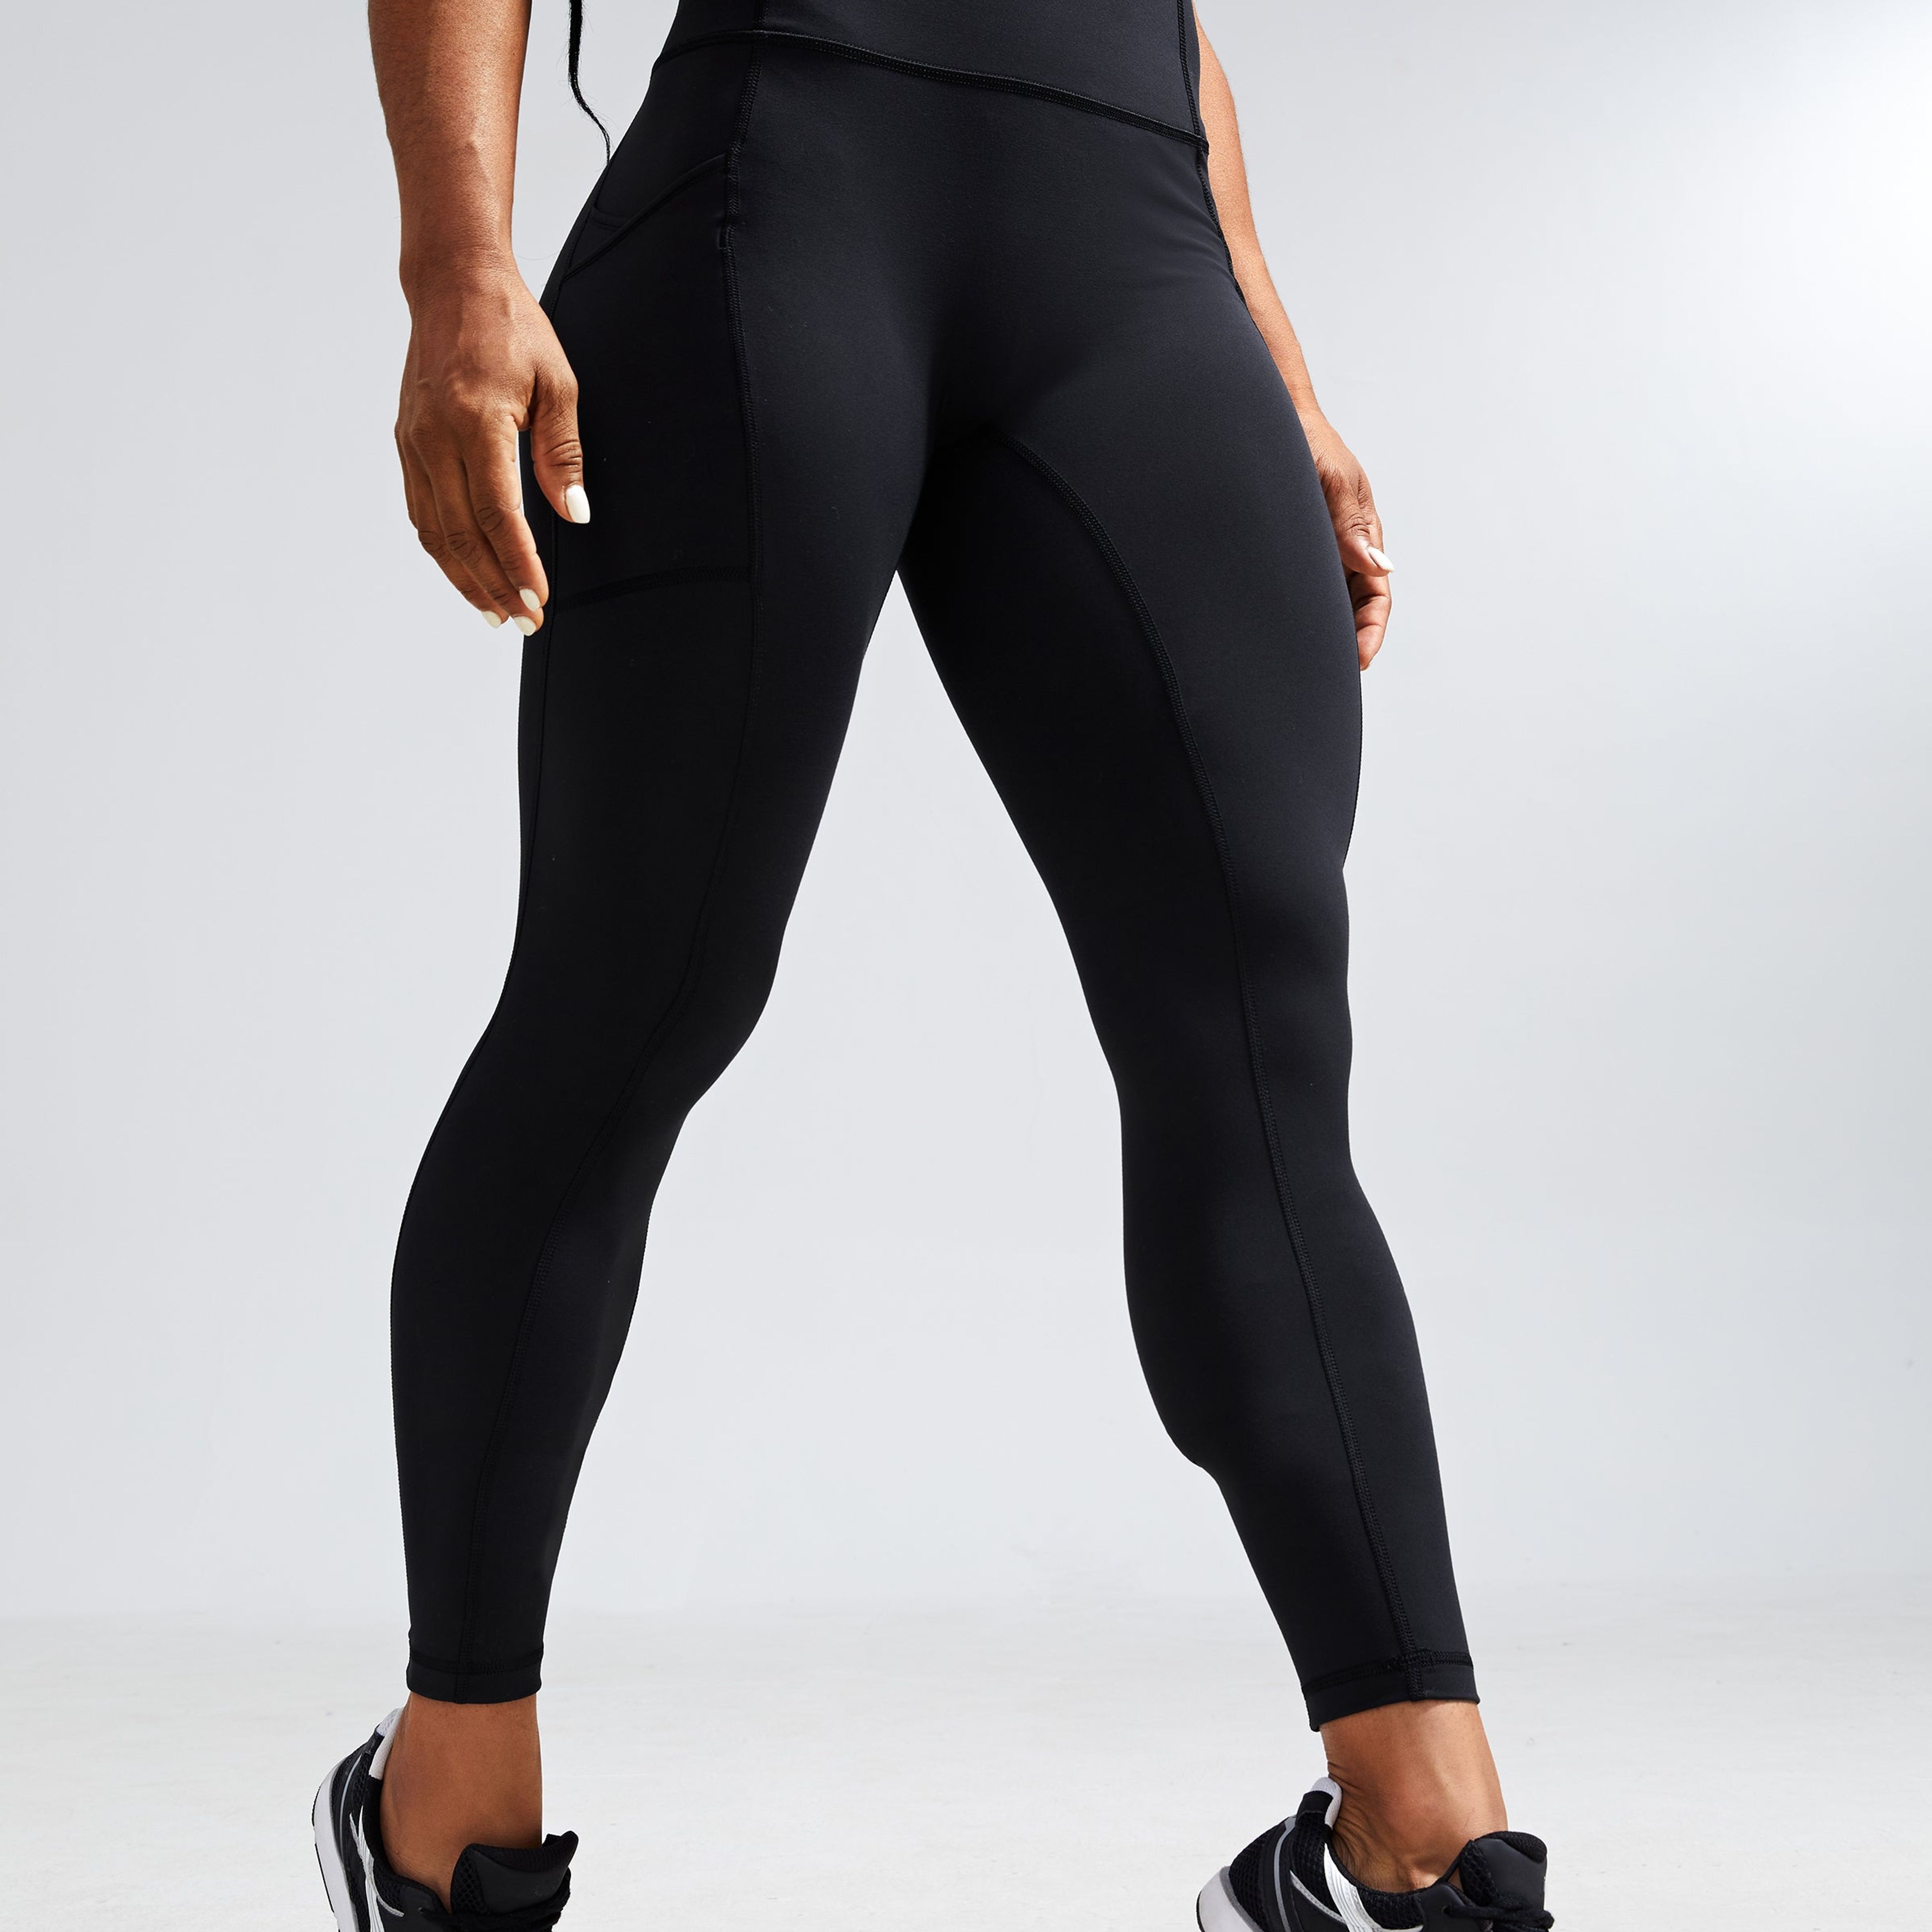 Crz Yoga Ulti-Dry Workout Pockets Leggings 25''-No Front Seam on Marmalade